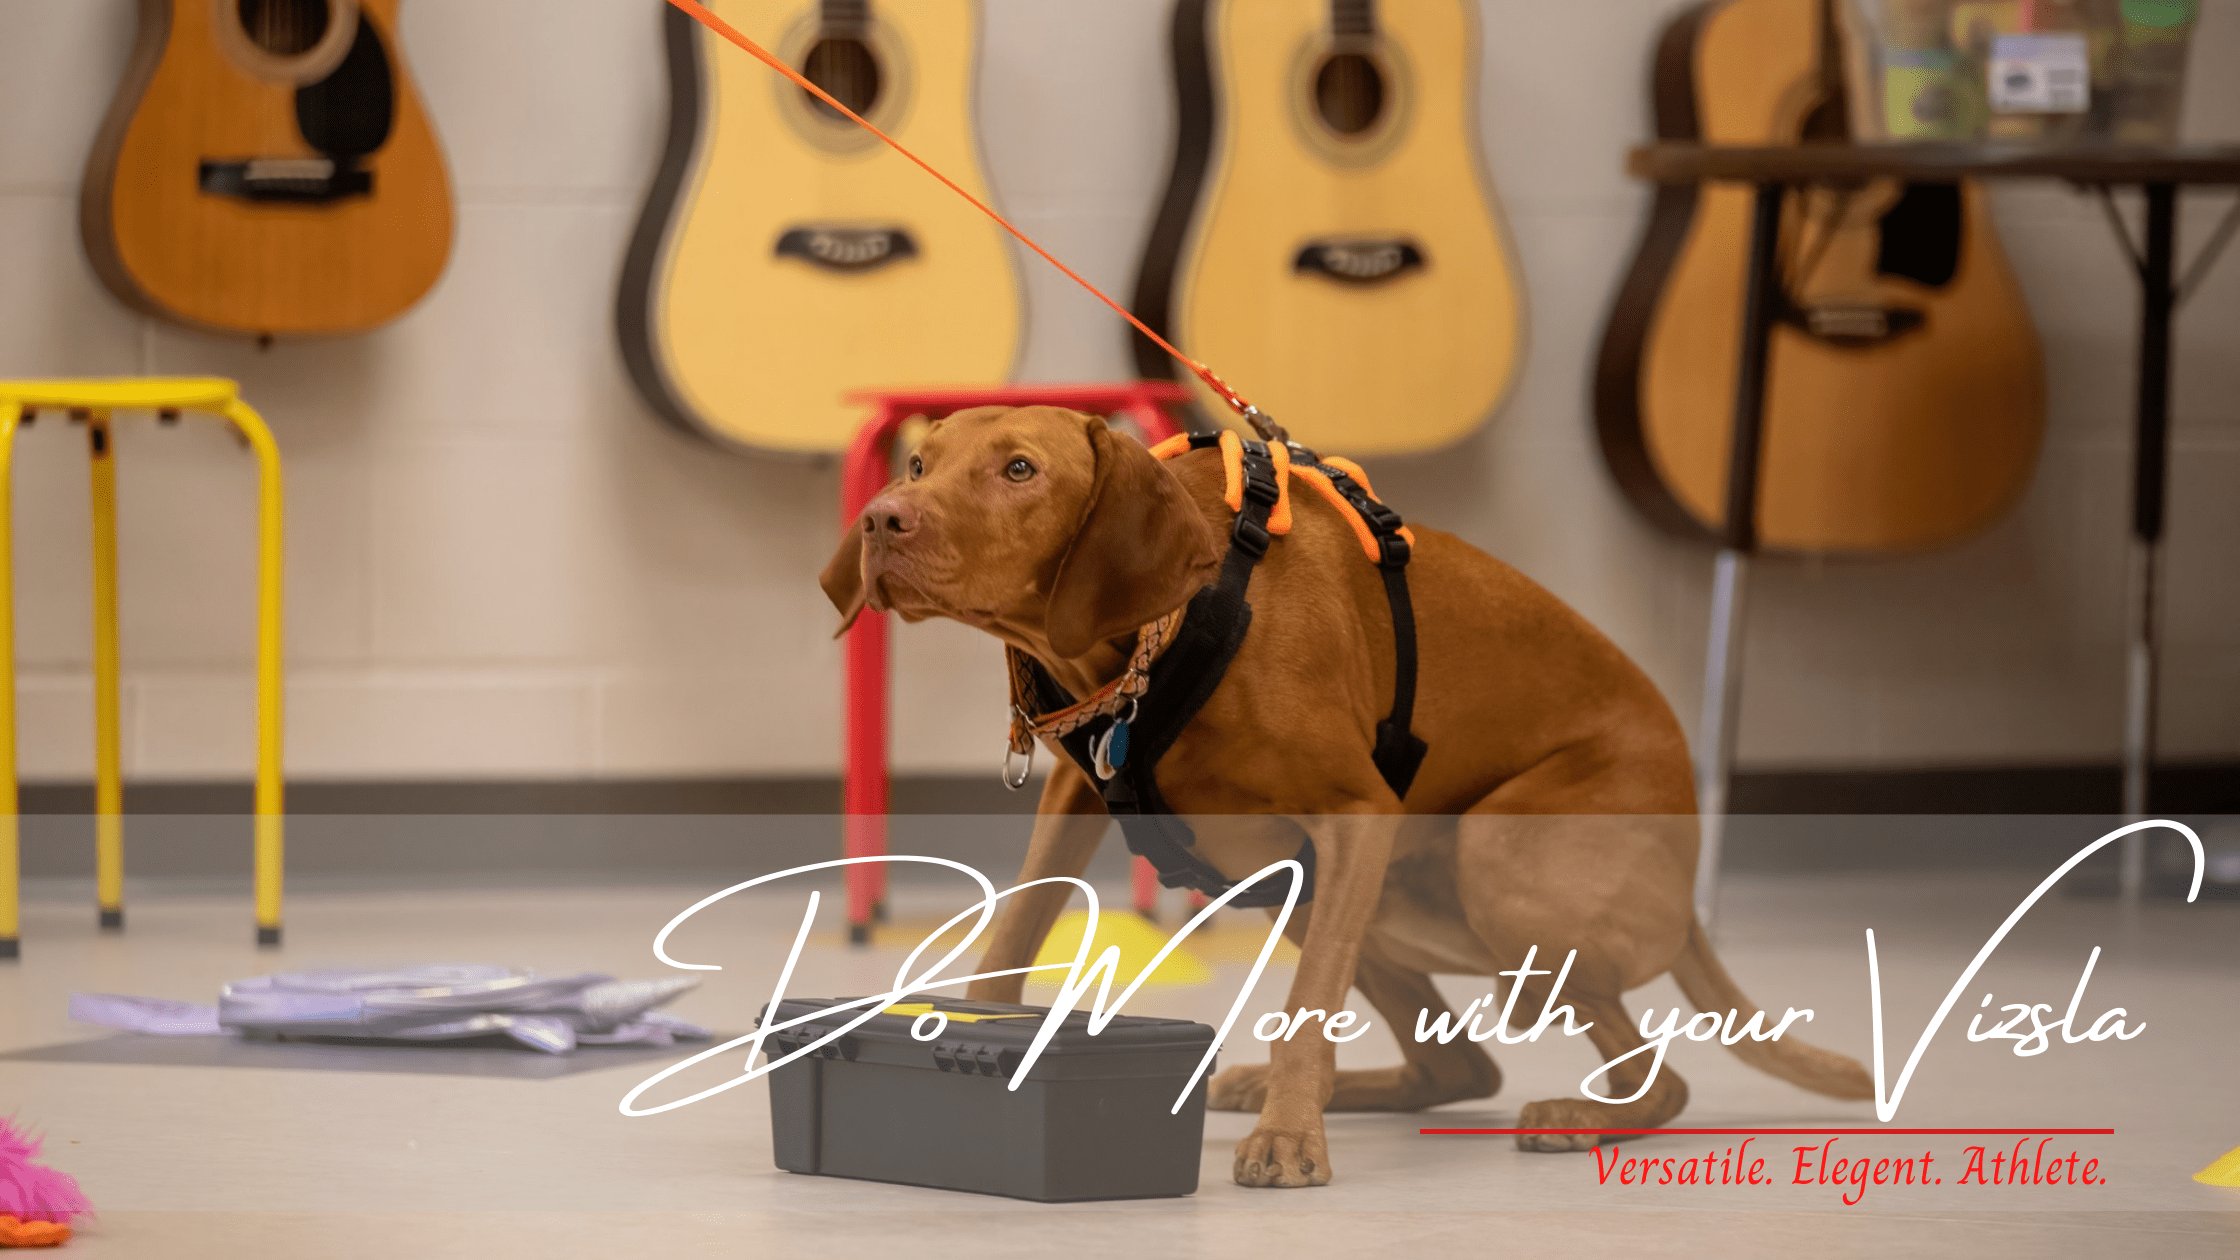 Changes to Twin Cities Vizsla Club Facebook Presence